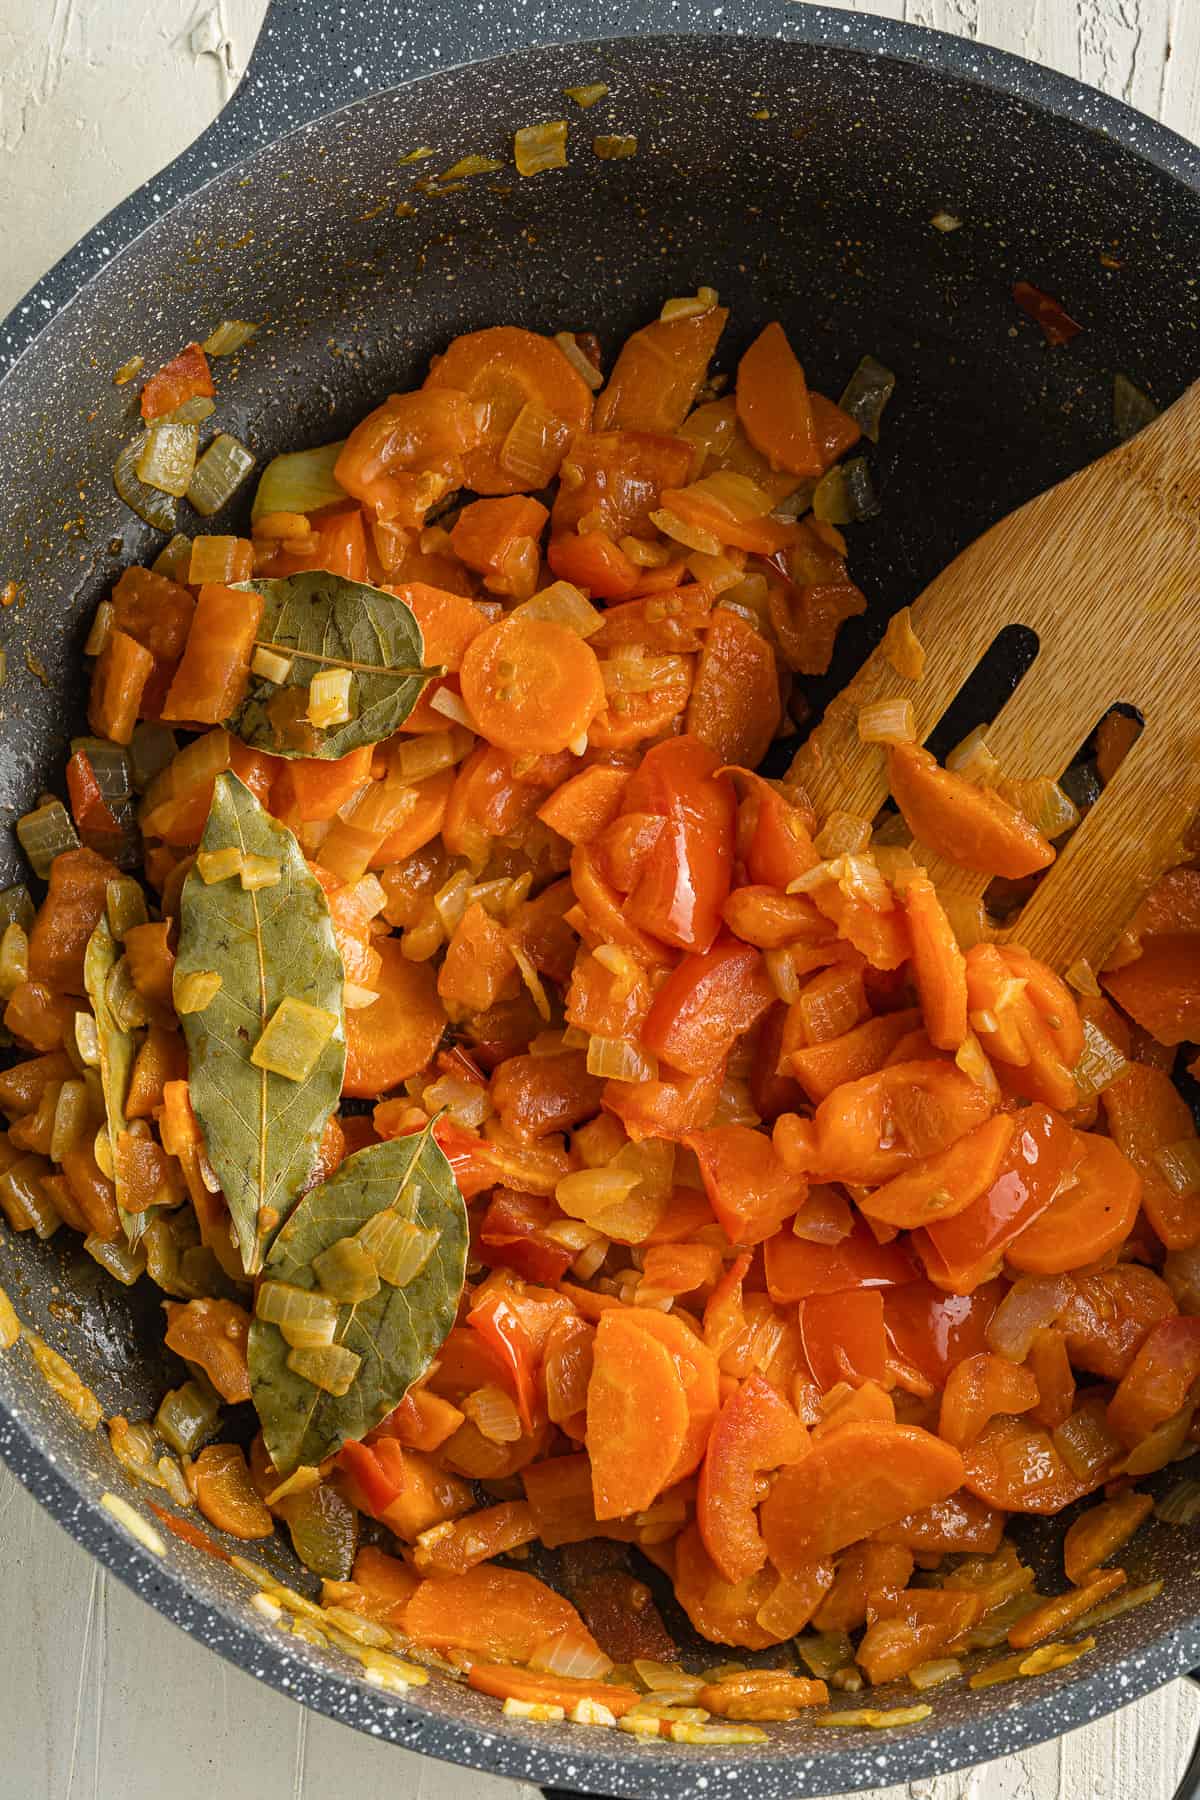 Top view of a black pot with sauteed carrots, onion, garlic, and chopped tomatoes in it with bay leaves mixed in.